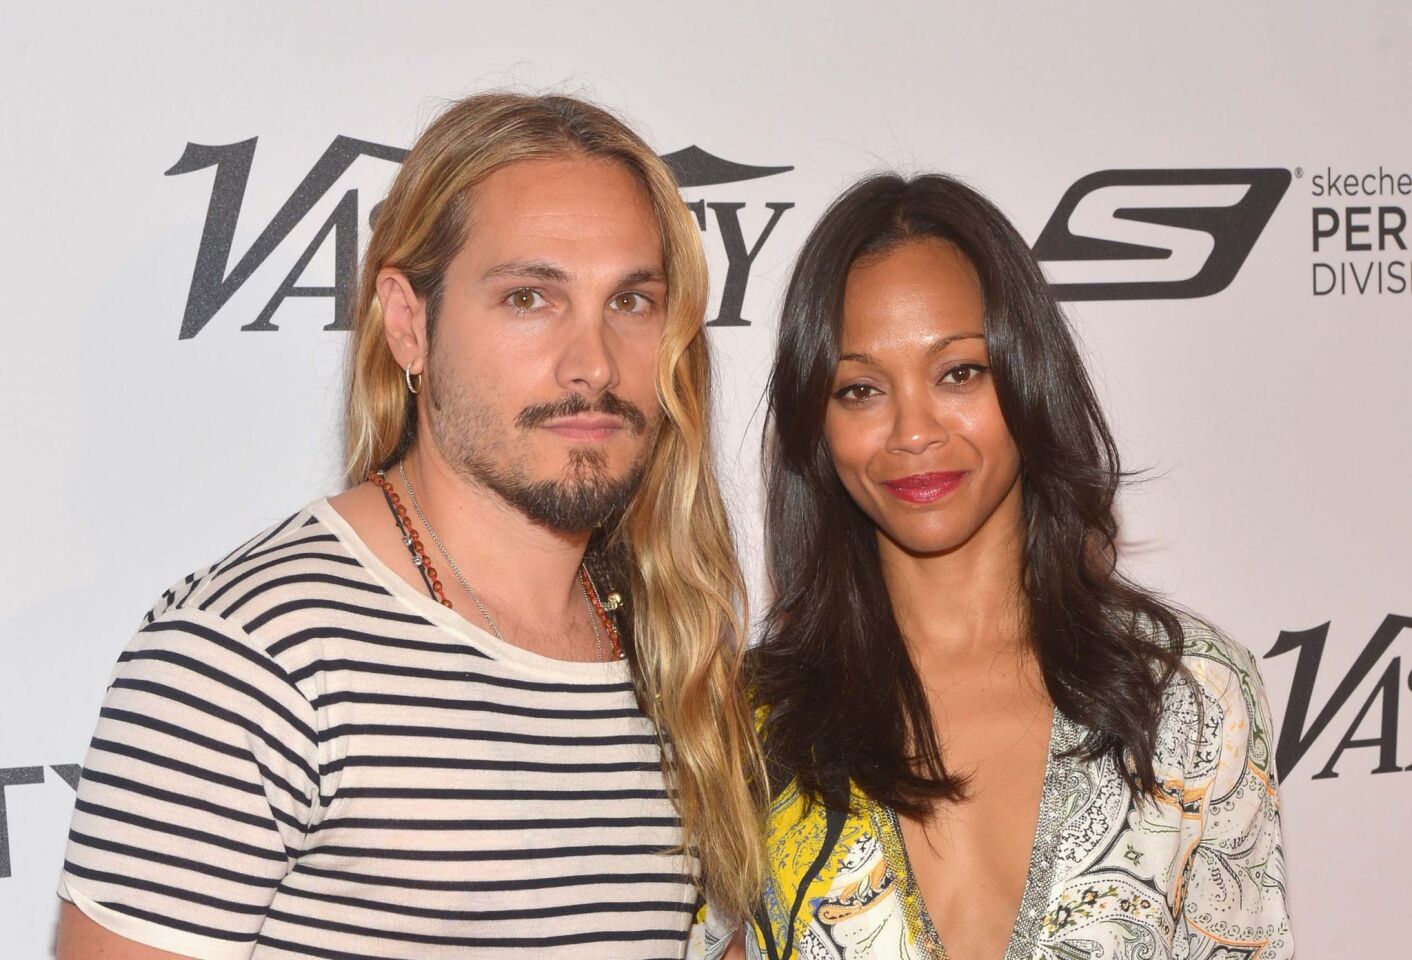 After keeping mum about her pregnancy for several months -- and sparking tons of rumors -- actress Zoe Saldana finally revealed that she was expecting with artist Marco Perego, whom she married in 2013. Saldana gave birth to twin sons Cy Aridio and Bowie Ezio.